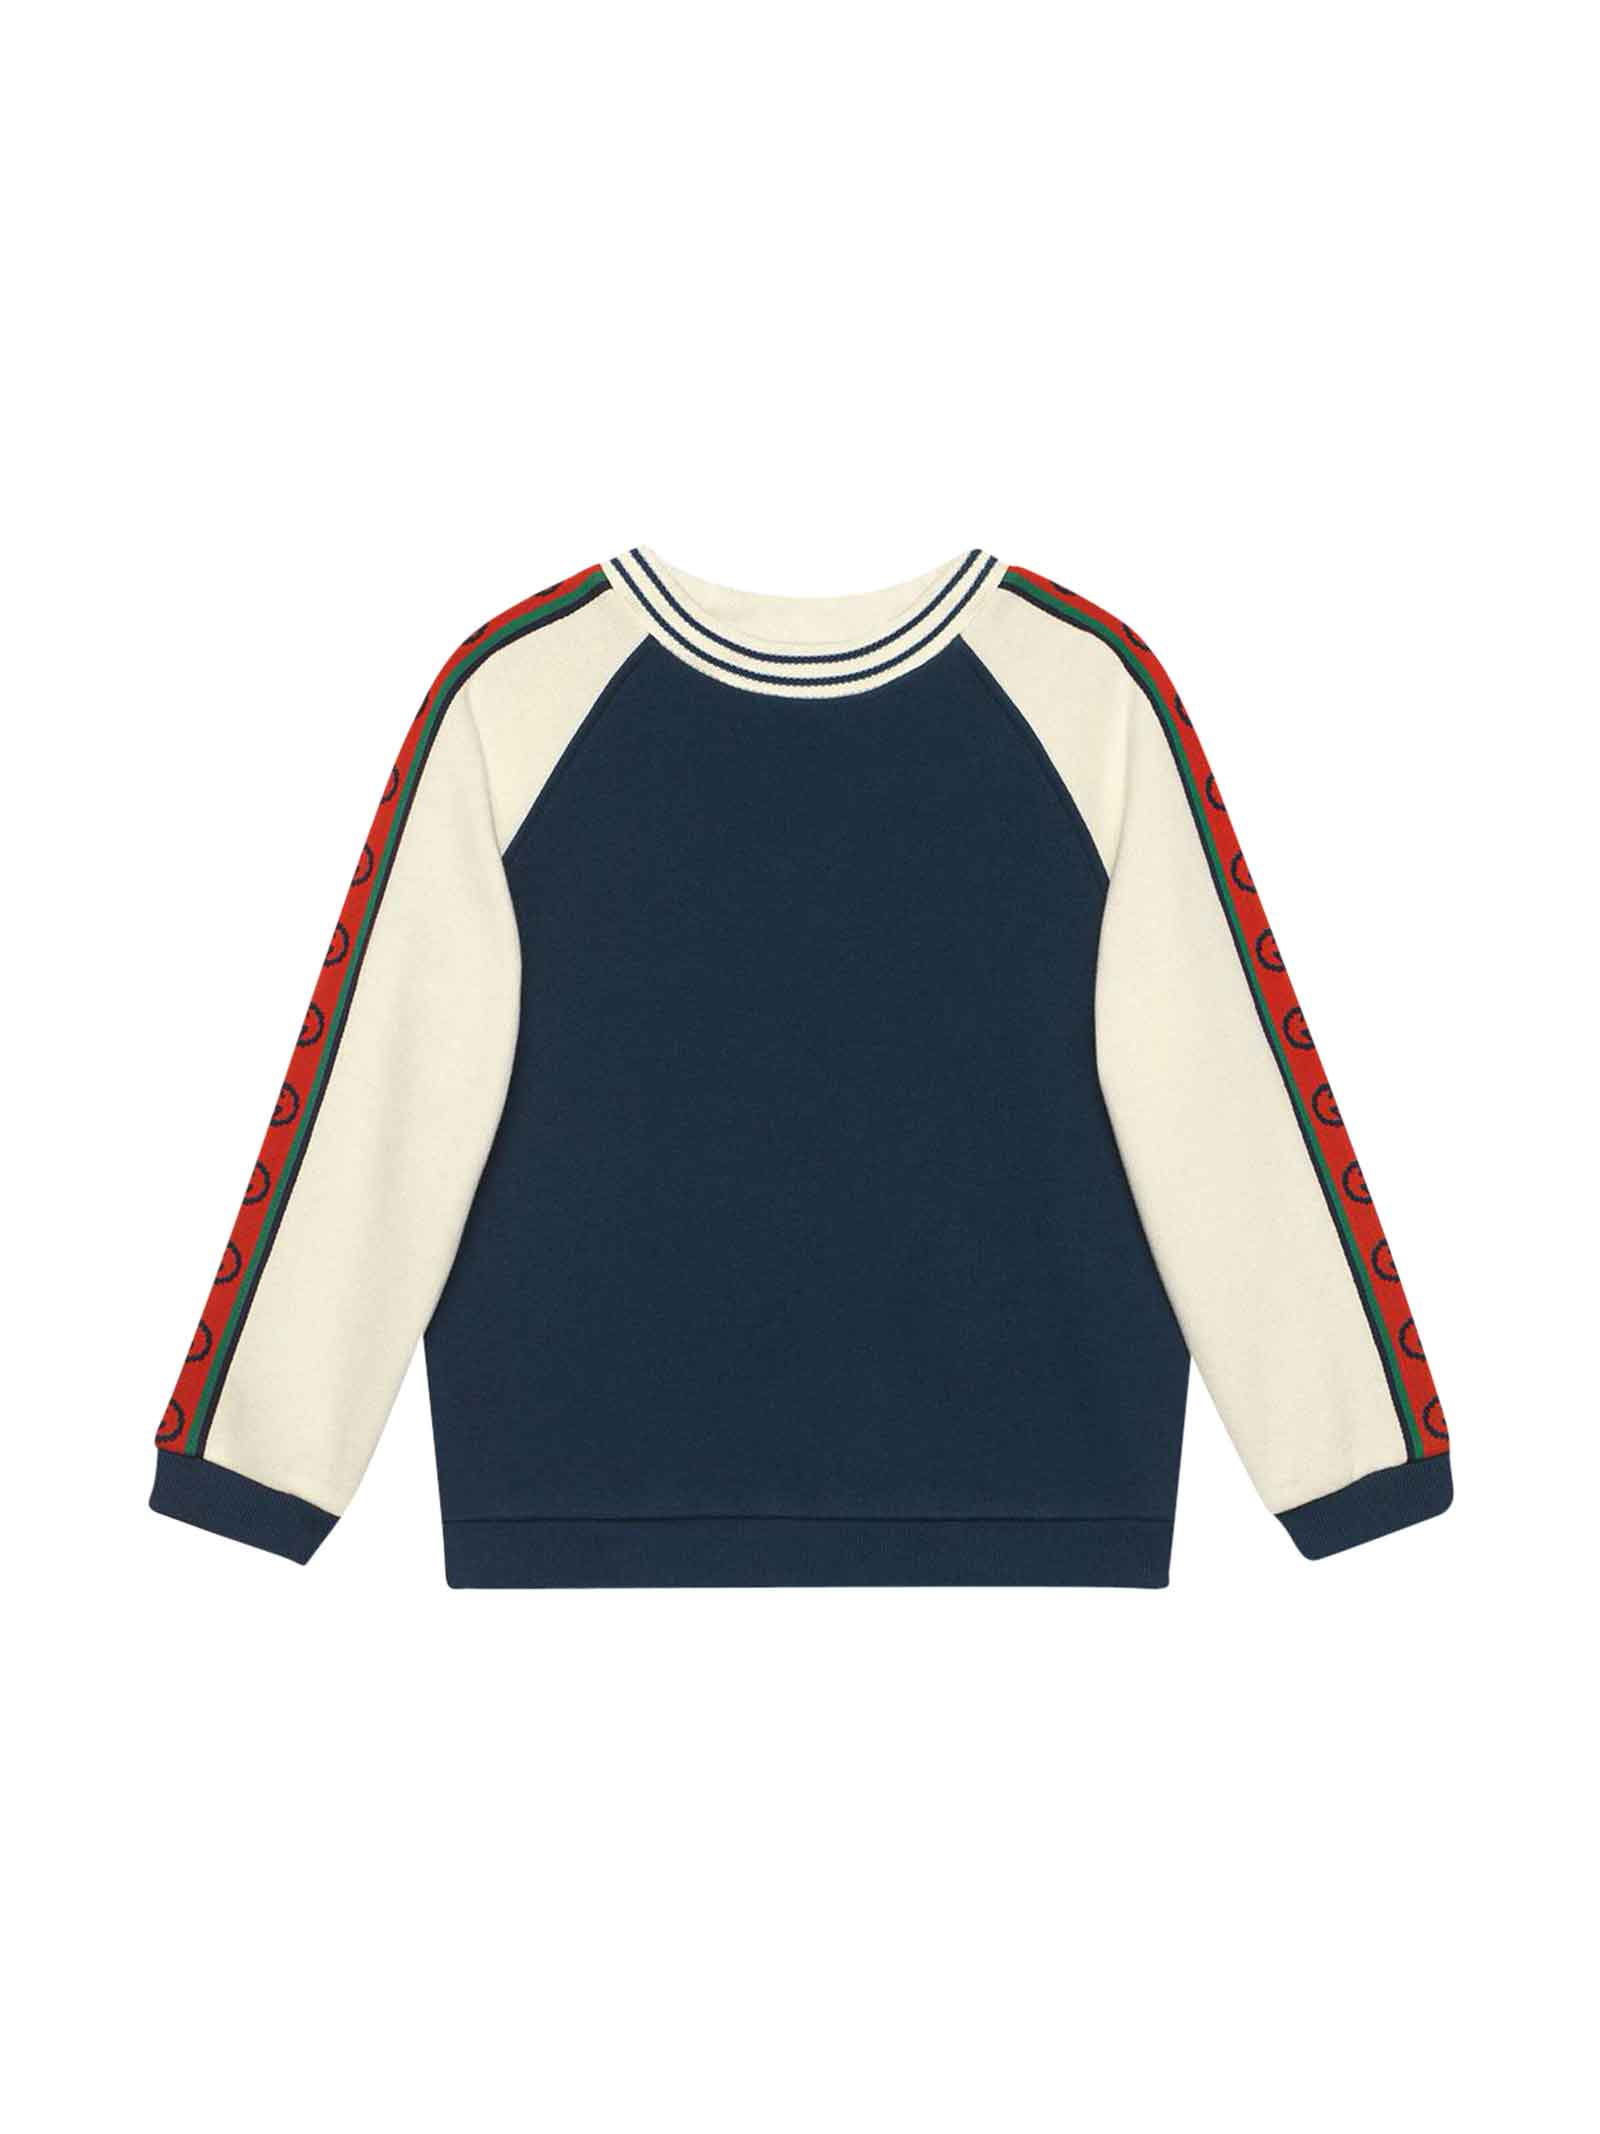 GUCCI BLUE AND WHITE SWEATSHIRT WITH RED SIDE BANDS,11252054